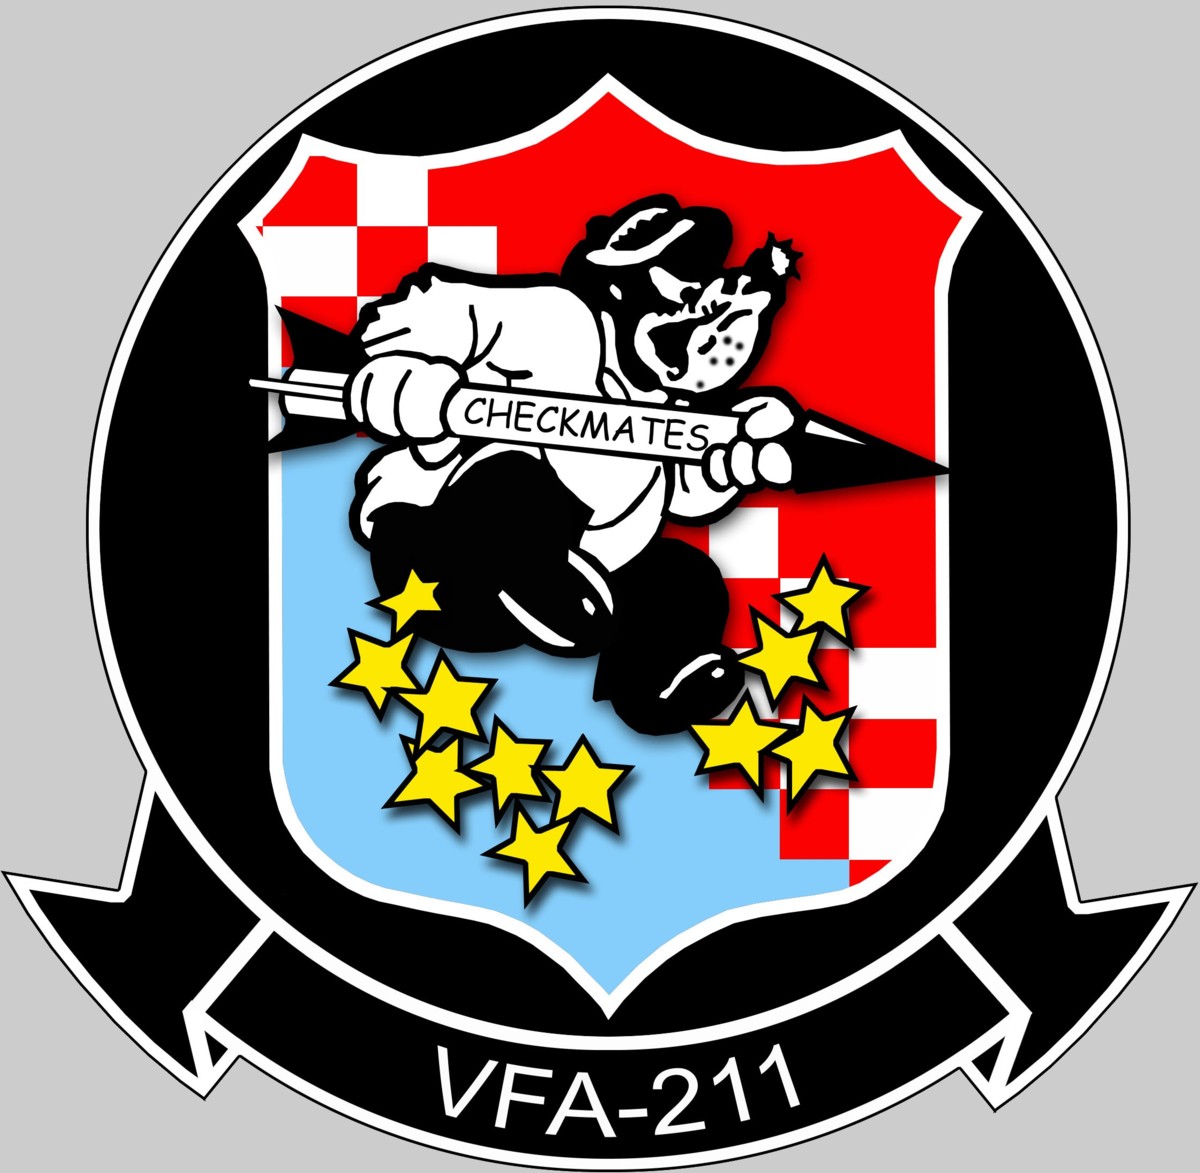 vfa-211 fighting checkmates insignia crest patch badge strike fighter squadron us navy 02x